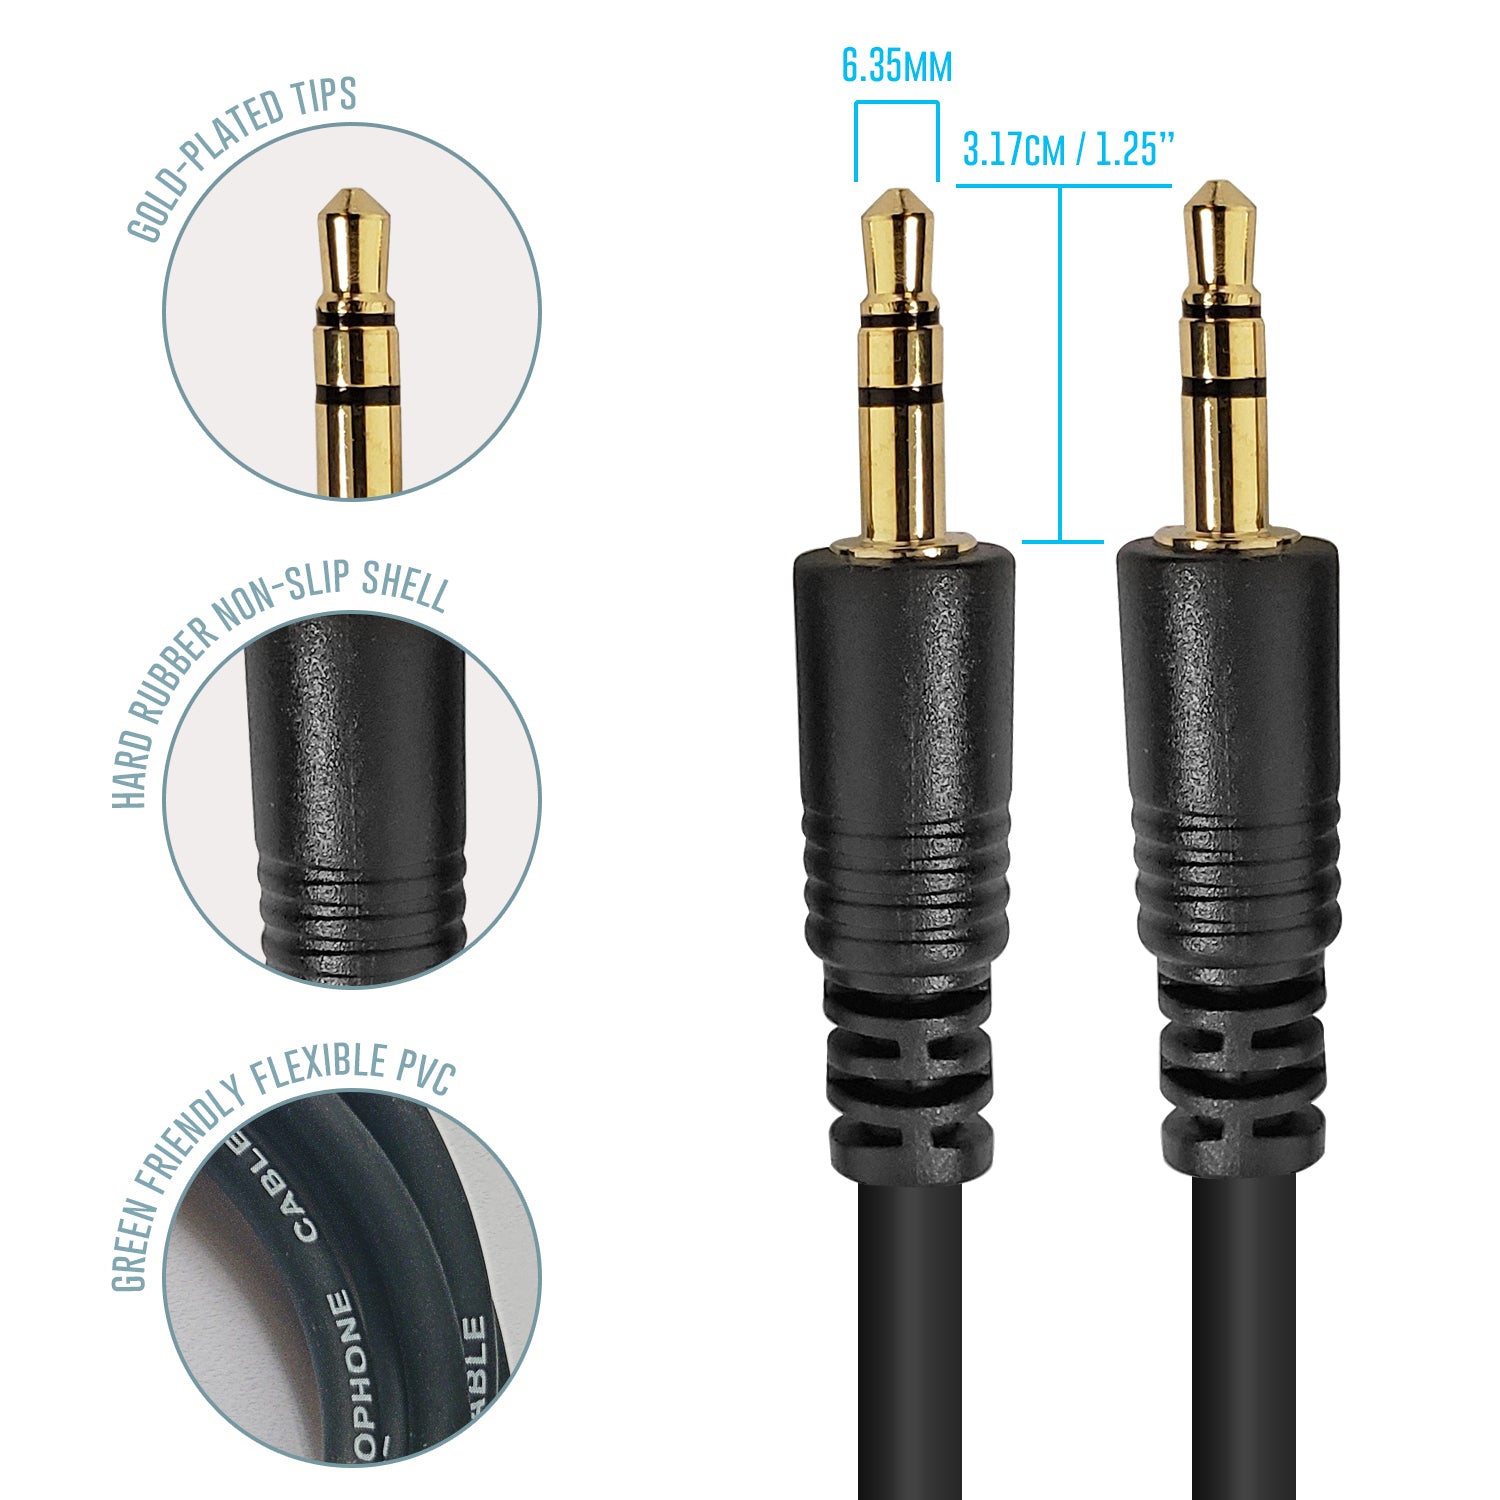 AxcessAbles 1/8 Inch TRS Instrument Cable 10ft - 6 Pack | 3.5mm Male Jack Stereo Audio Cord | 10ft TRS to TRS Balanced Patch Cables (6-Pack)